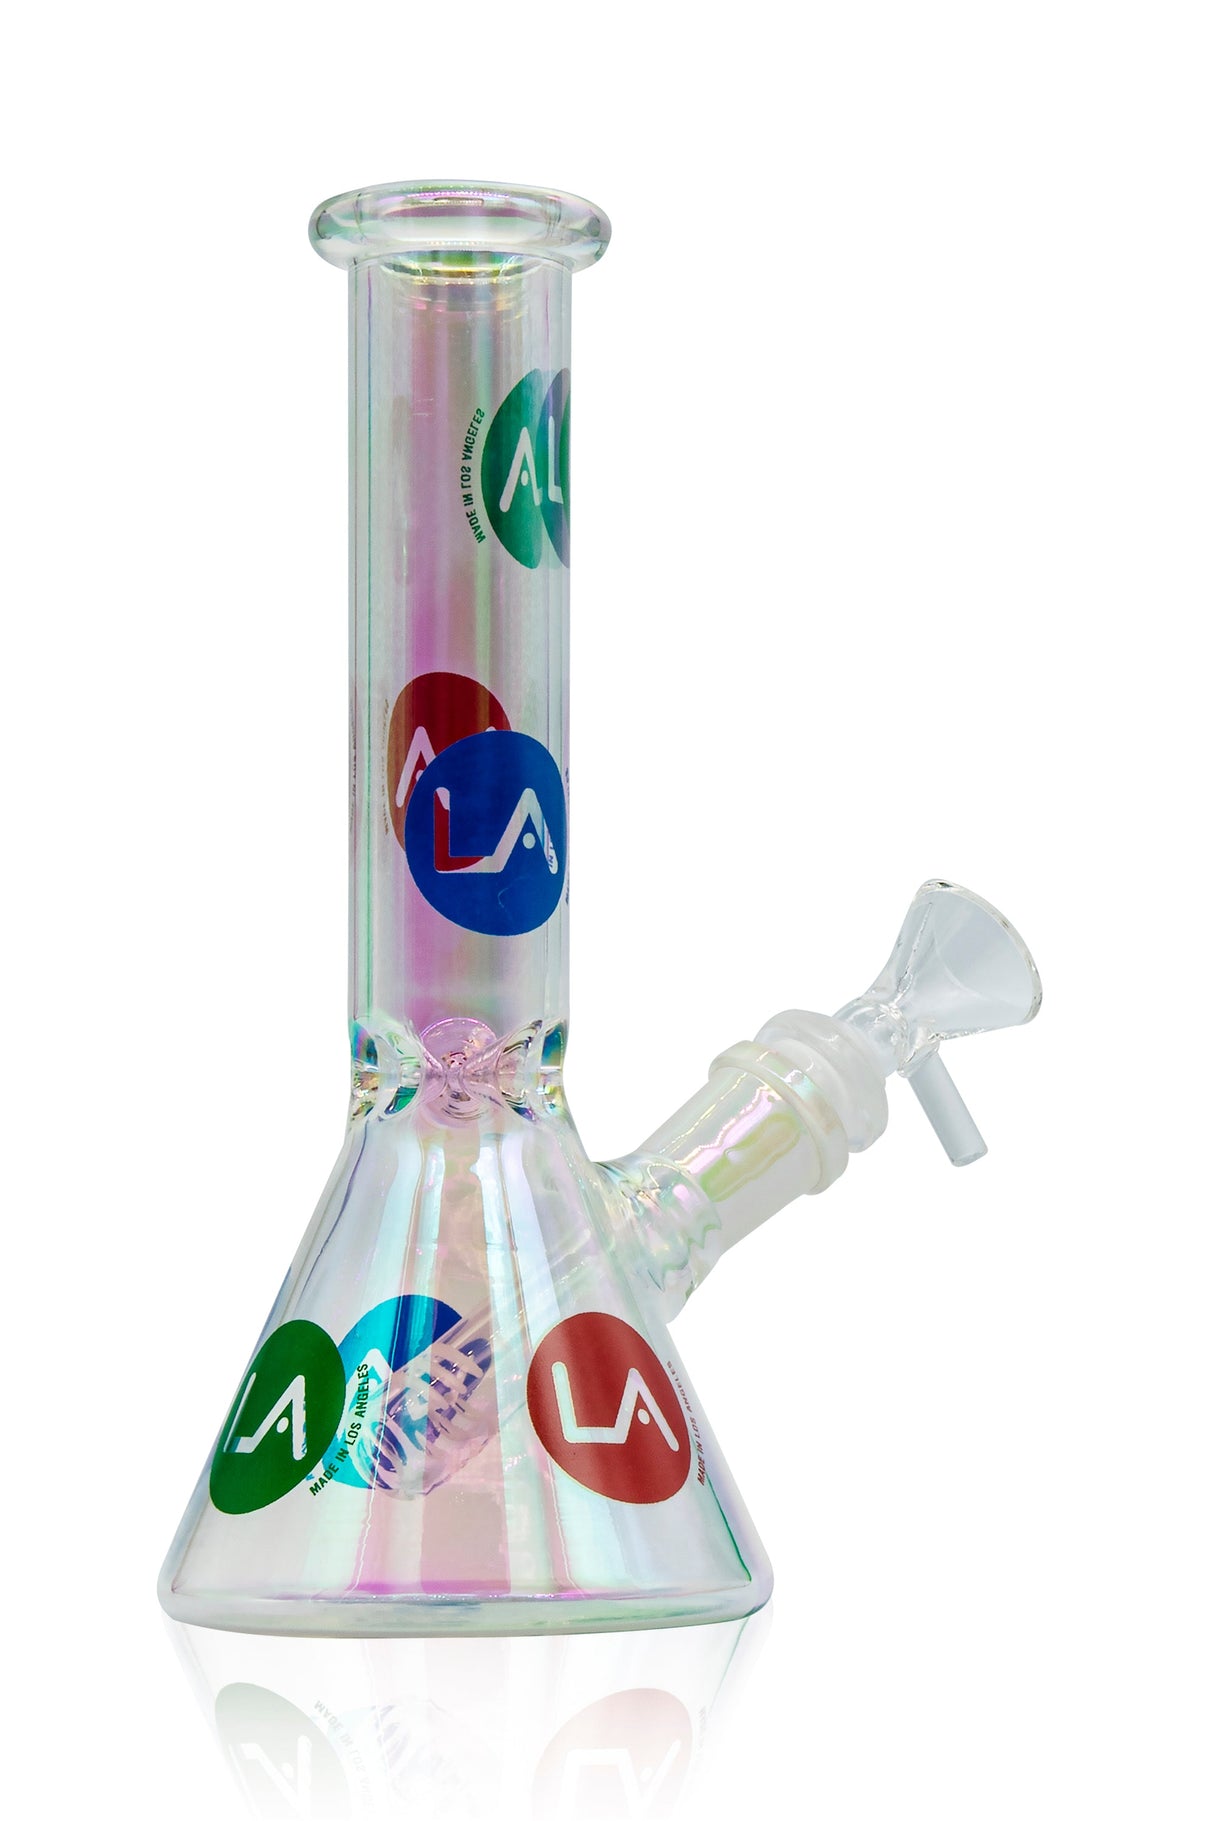 LA Pipes Disco Beaker Bong with iridescent finish and colorful logo, side view on white background